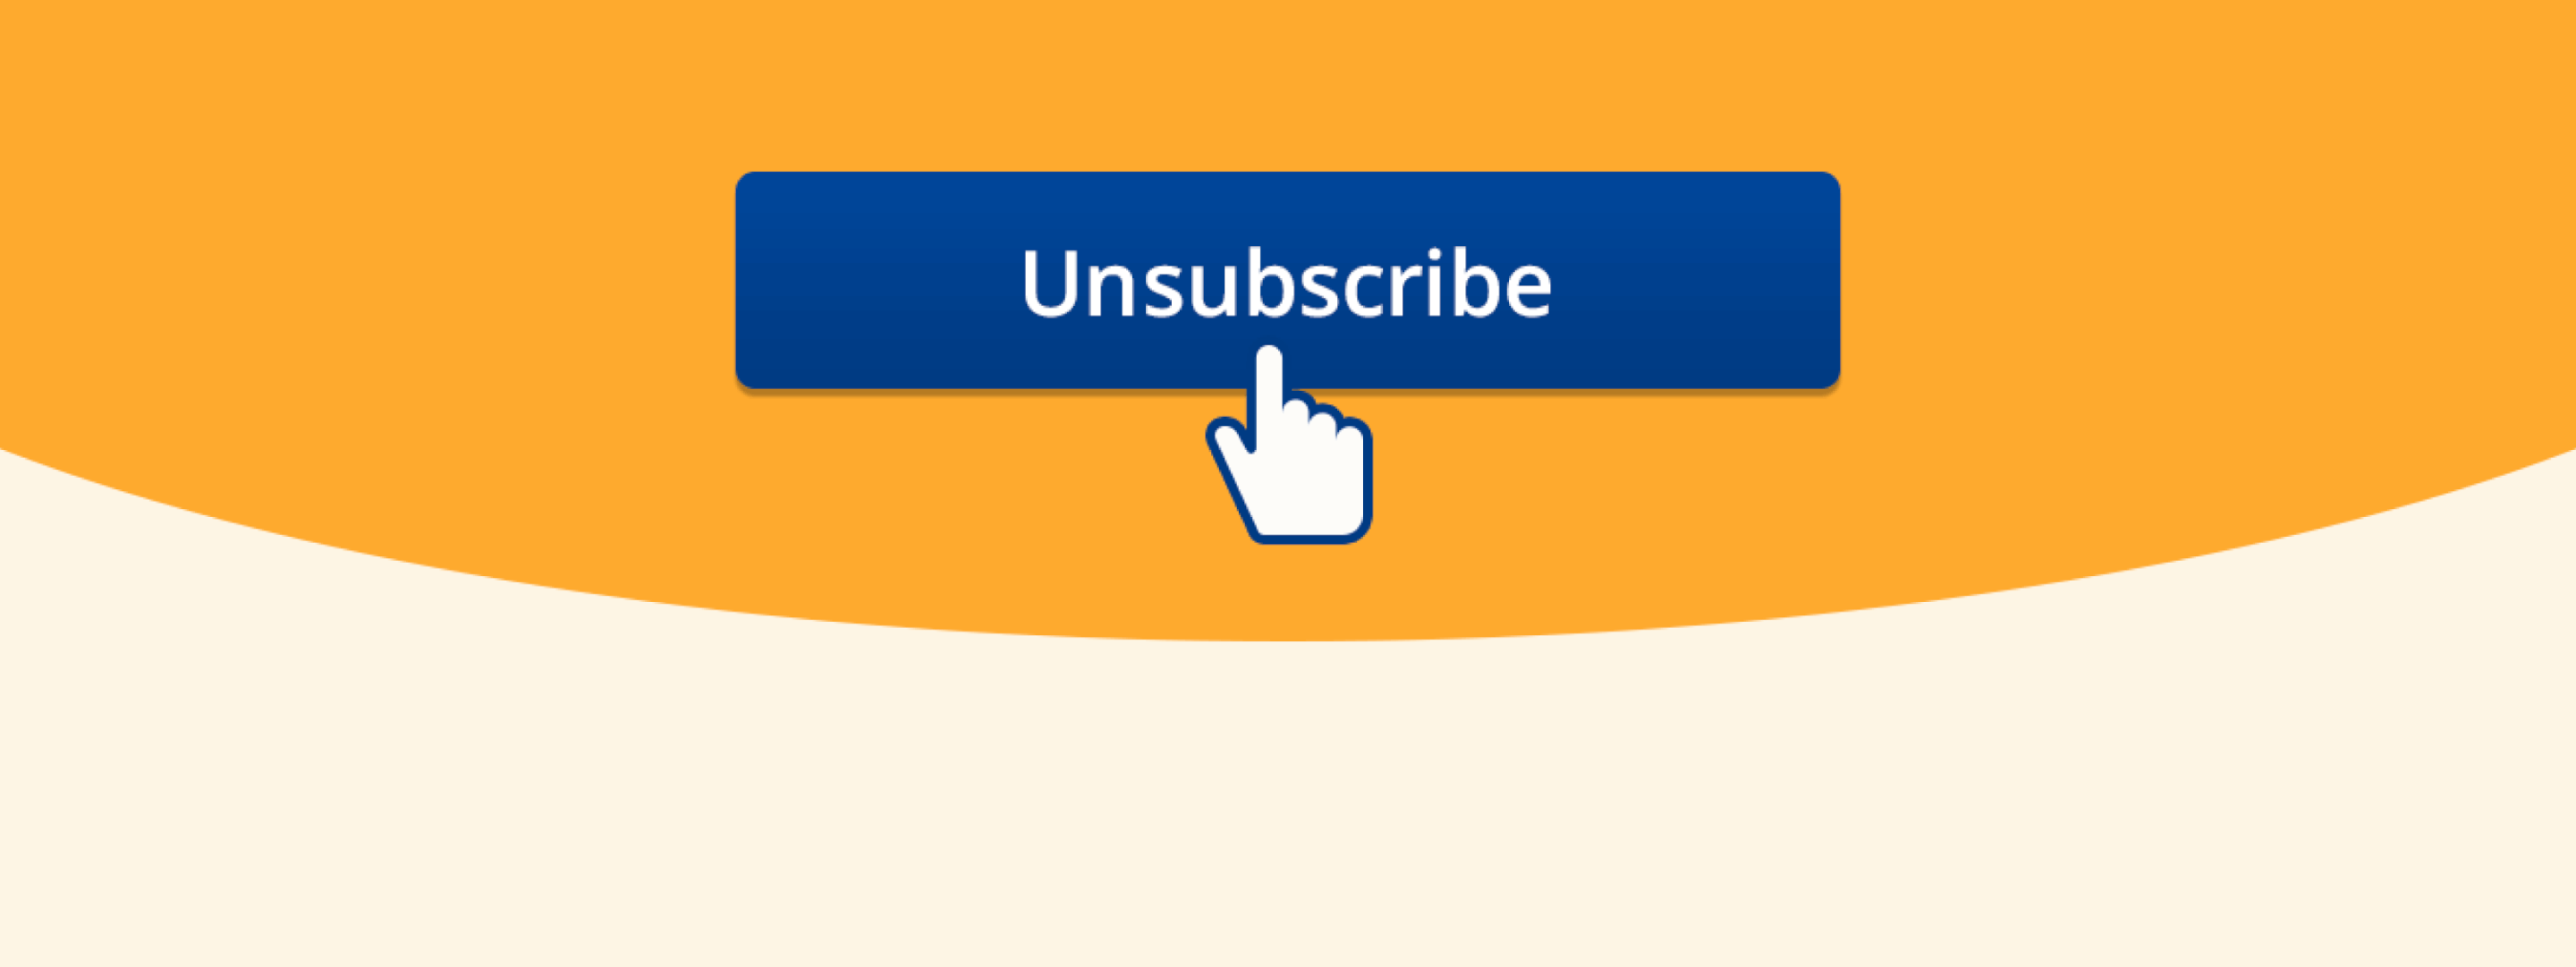 7 Tips For Effective Email Unsubscribe